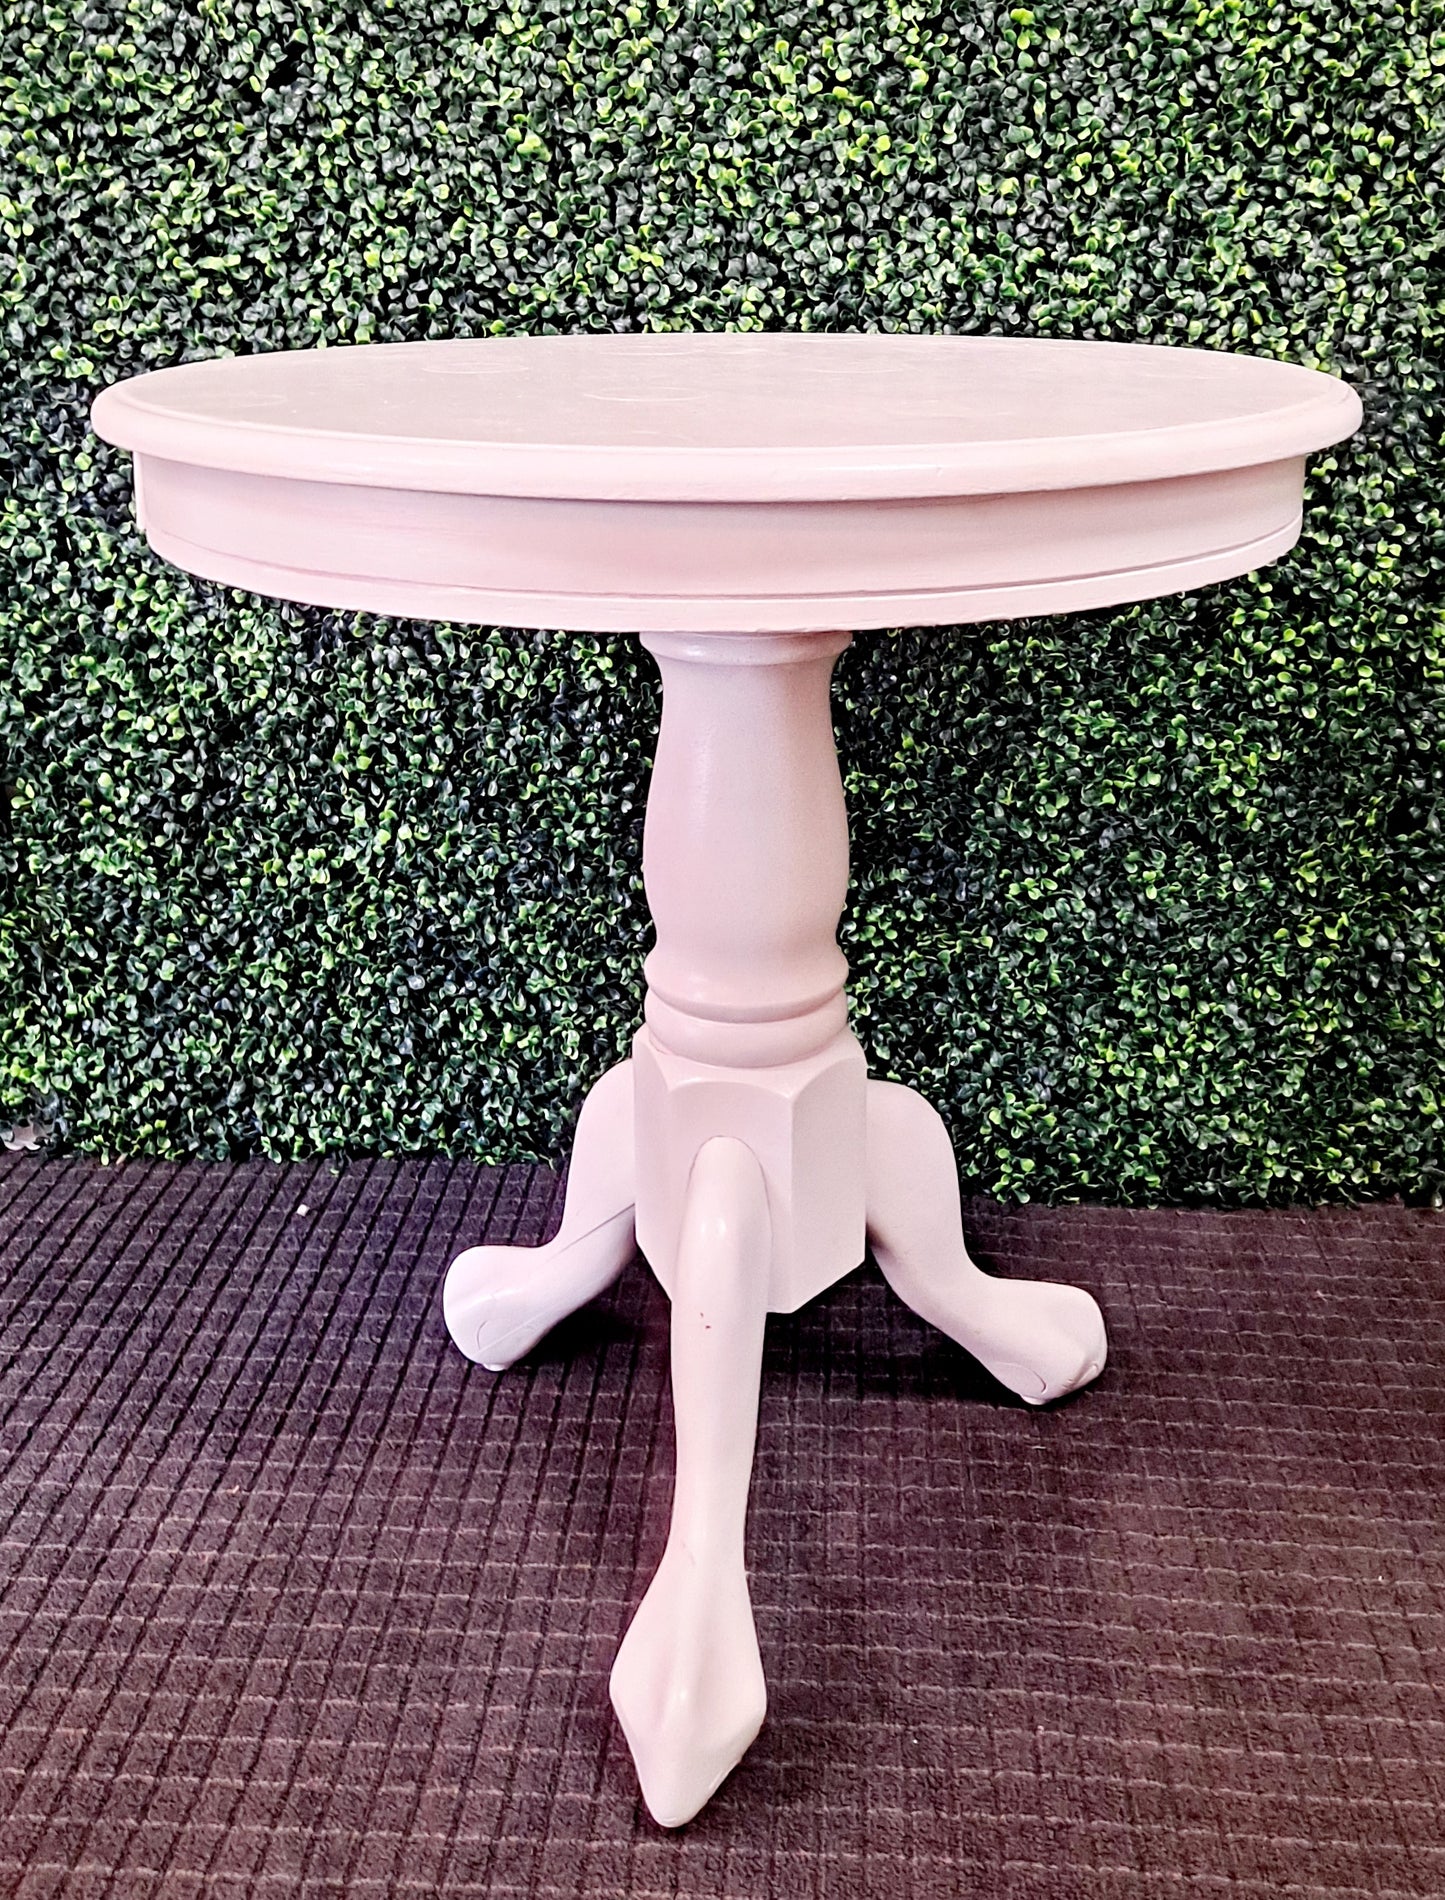 White round side table